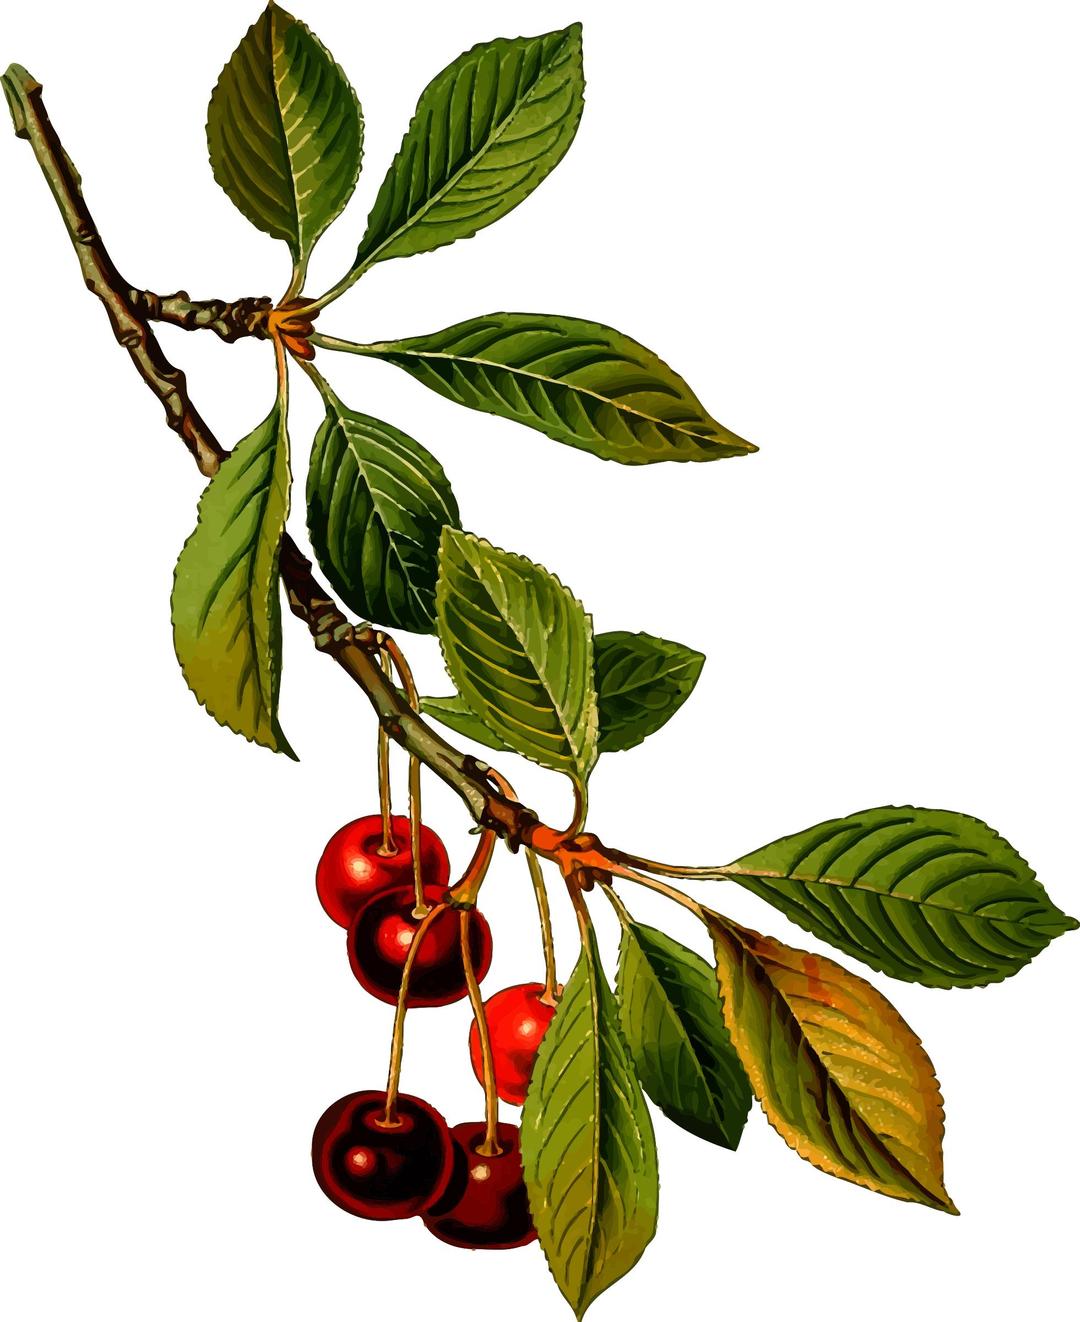 Sour cherry tree 2 (detailed) png transparent